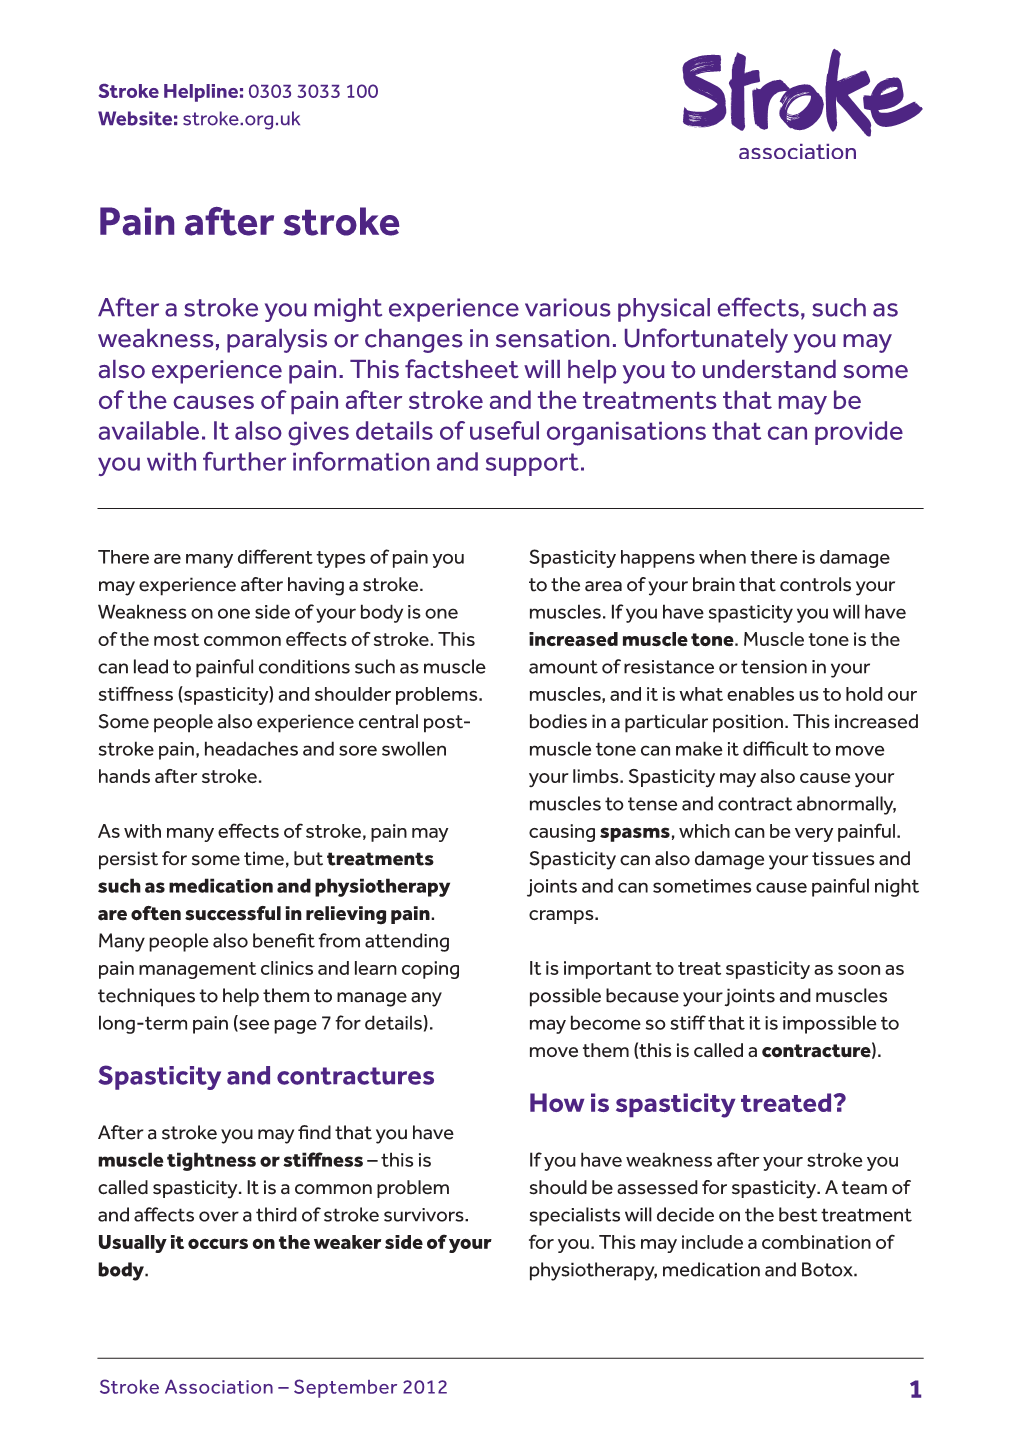 Pain After Stroke